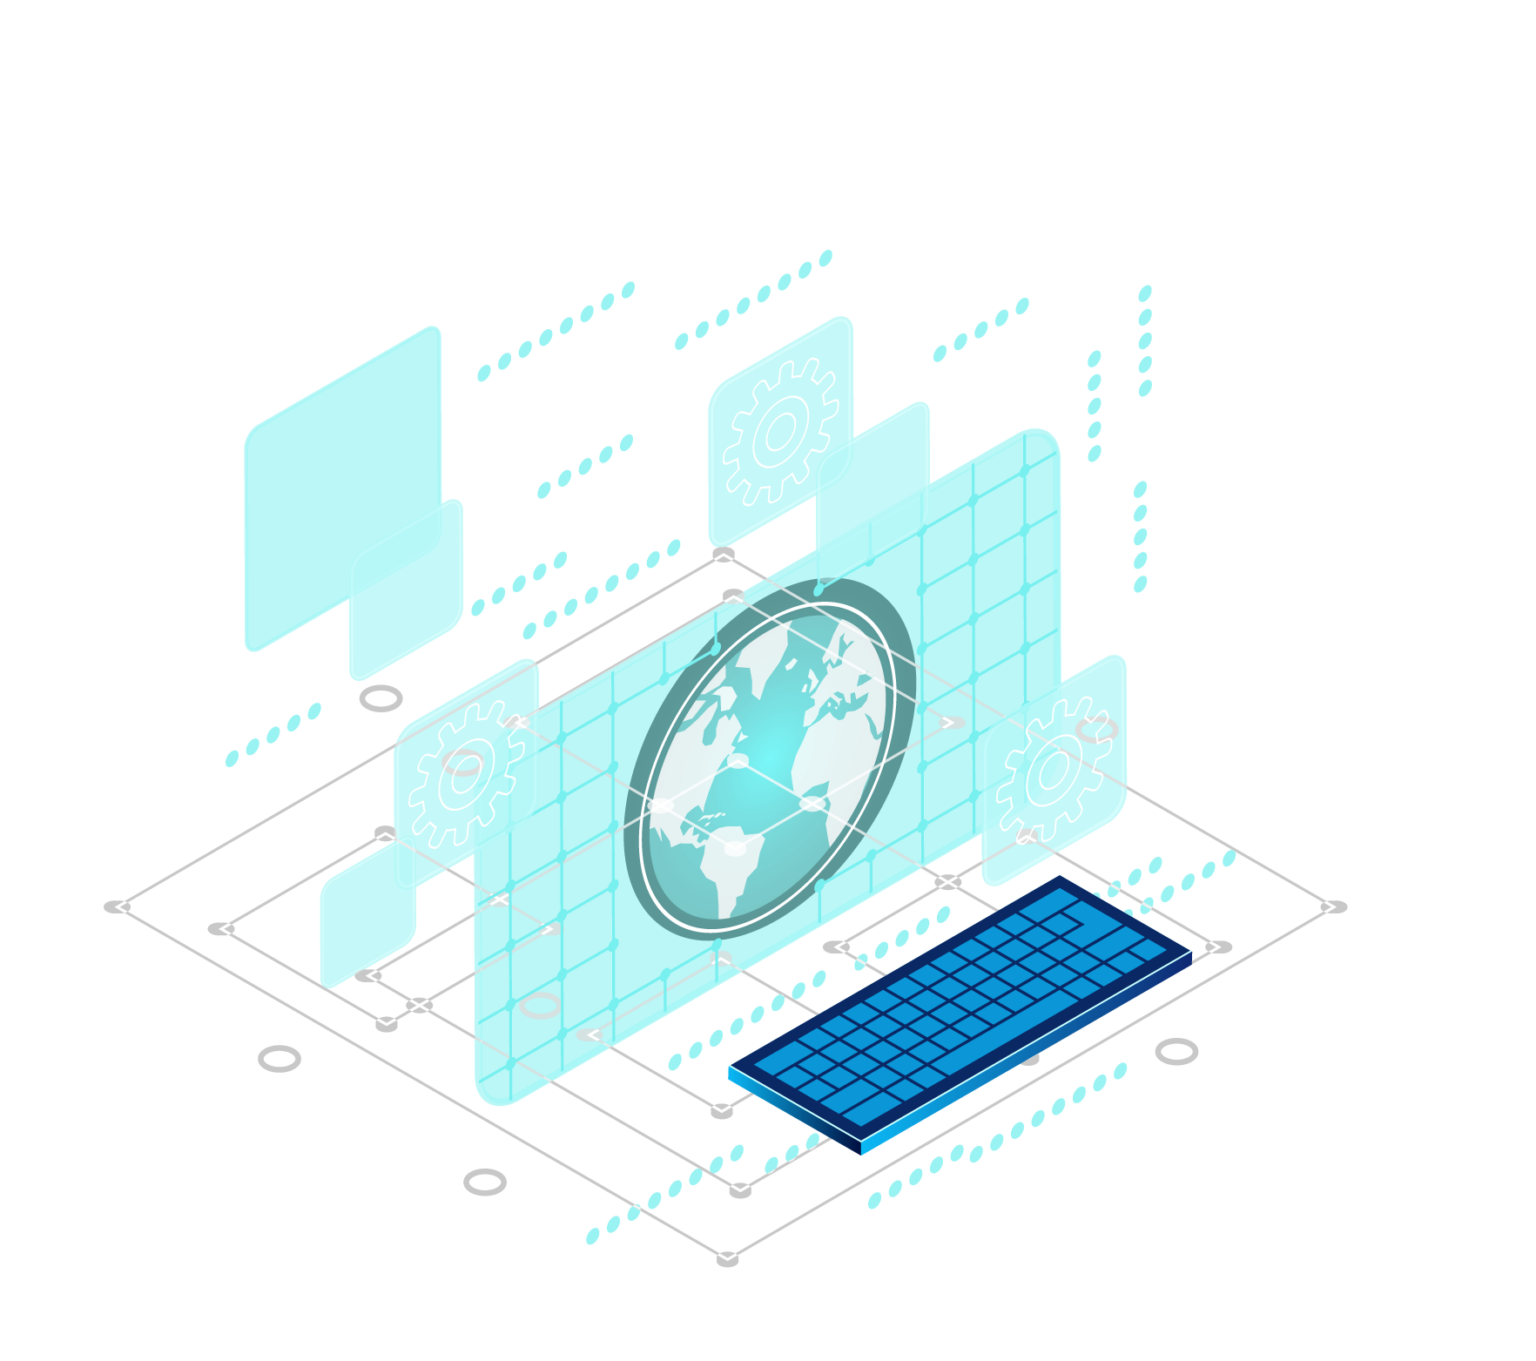 3D image of a computer to denote Key Features of Globalgig's Managed SD WAN